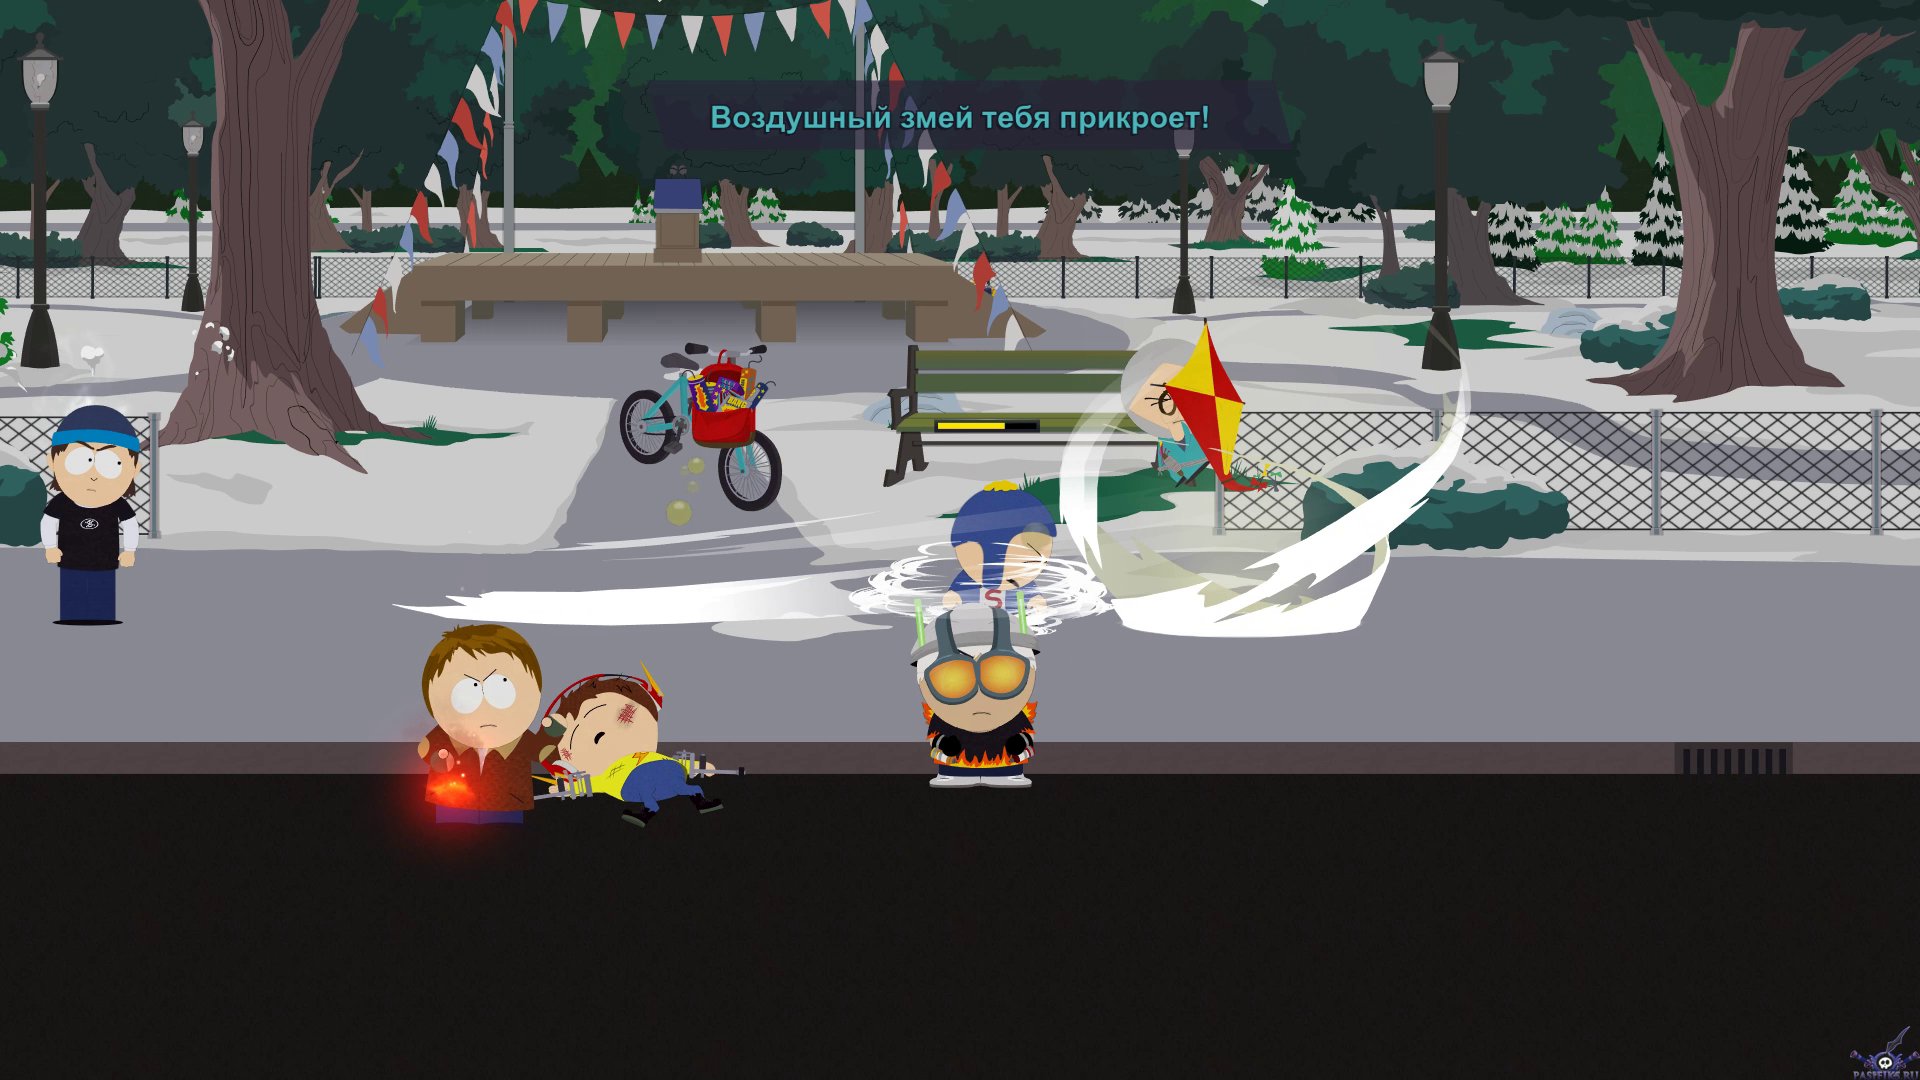 pc-7-south-park-the-fractured-but-whole---moskit-v-lovushke